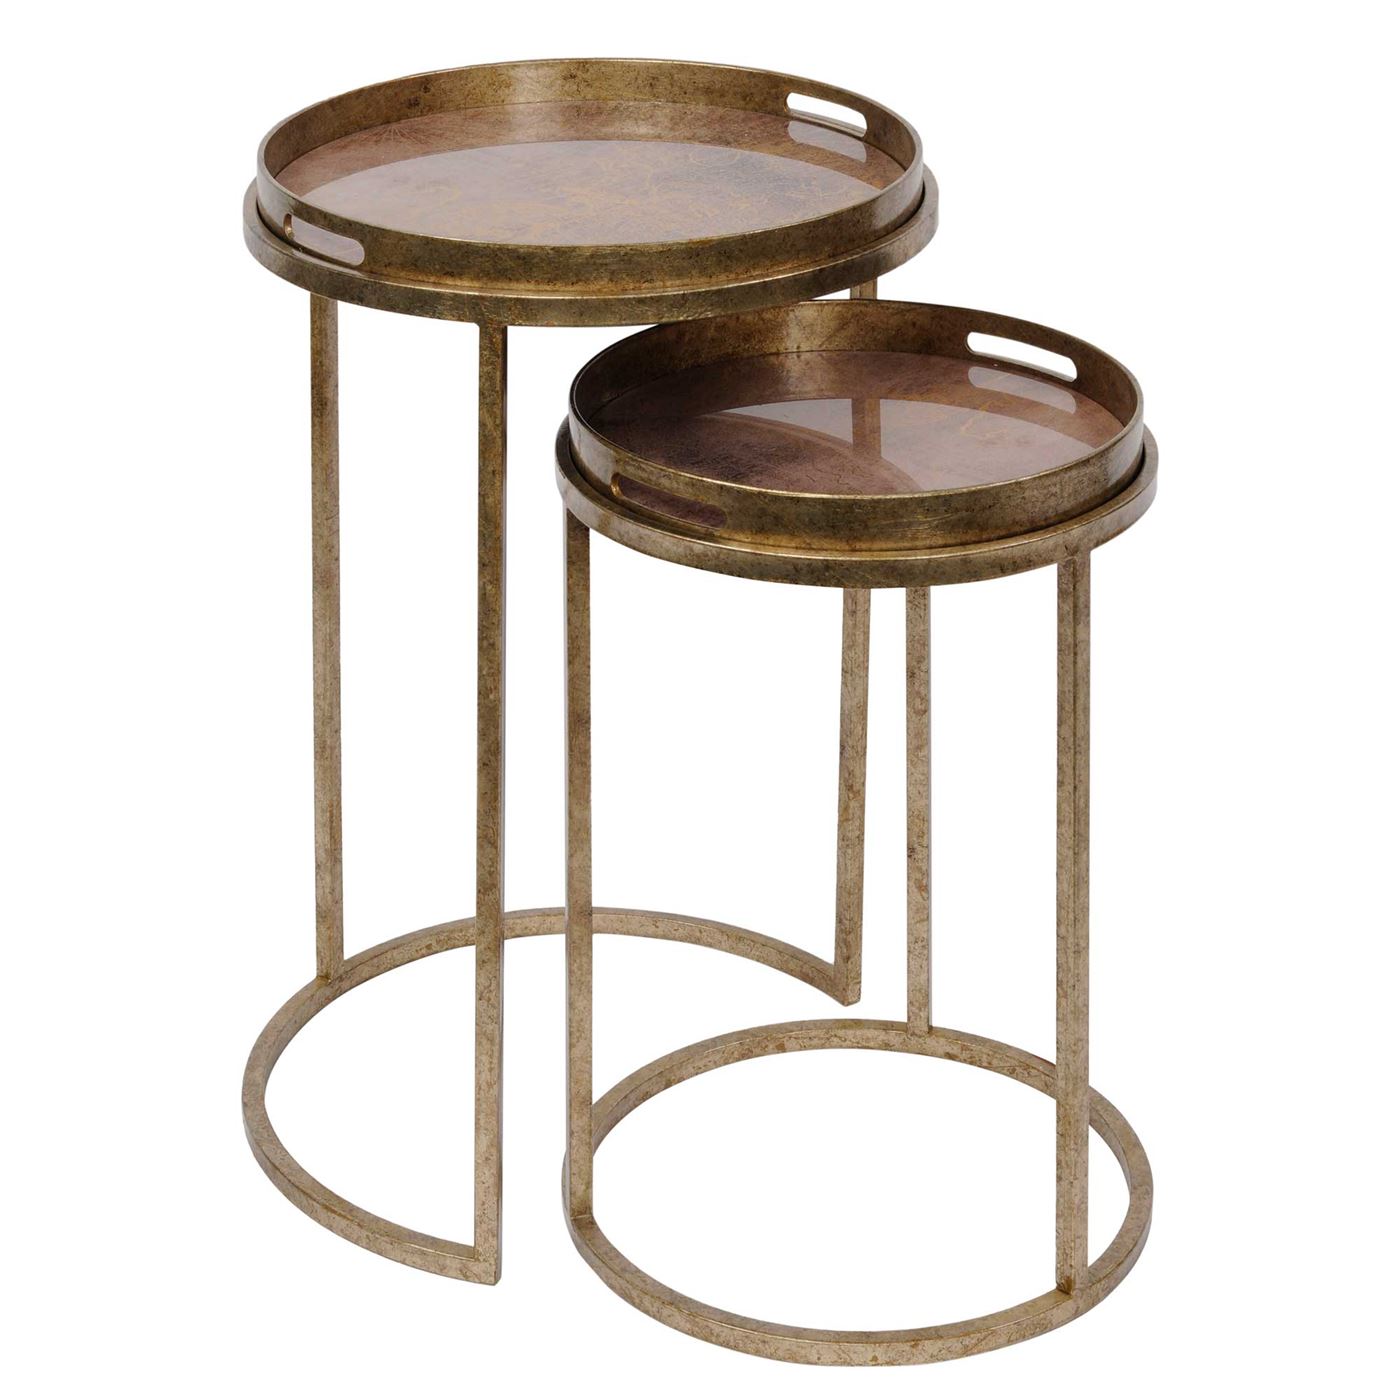 Photo of Set of 2 antique gold atlas side tables in round